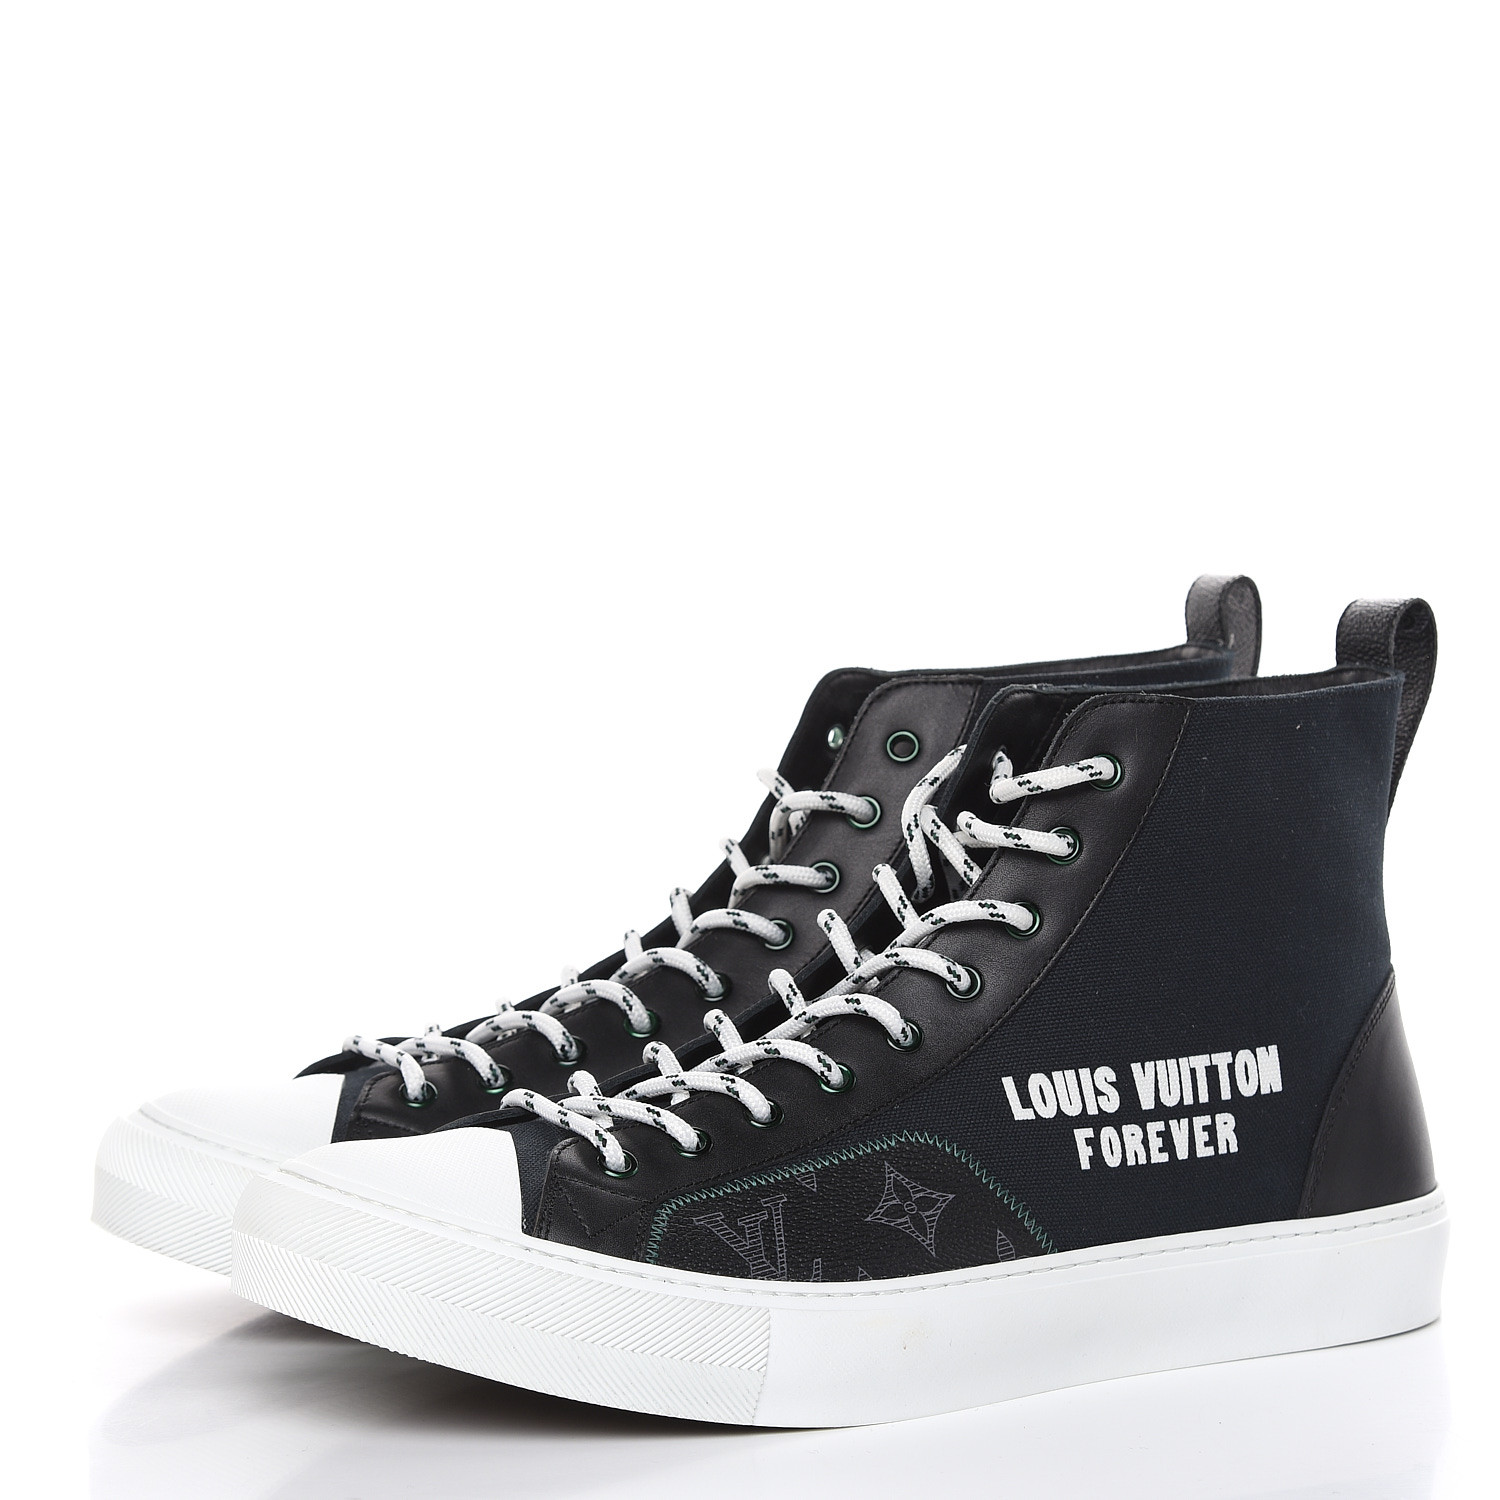 LOUIS VUITTON Canvas LV Forever Tattoo Sneaker Boots 11 Black 474649 ...